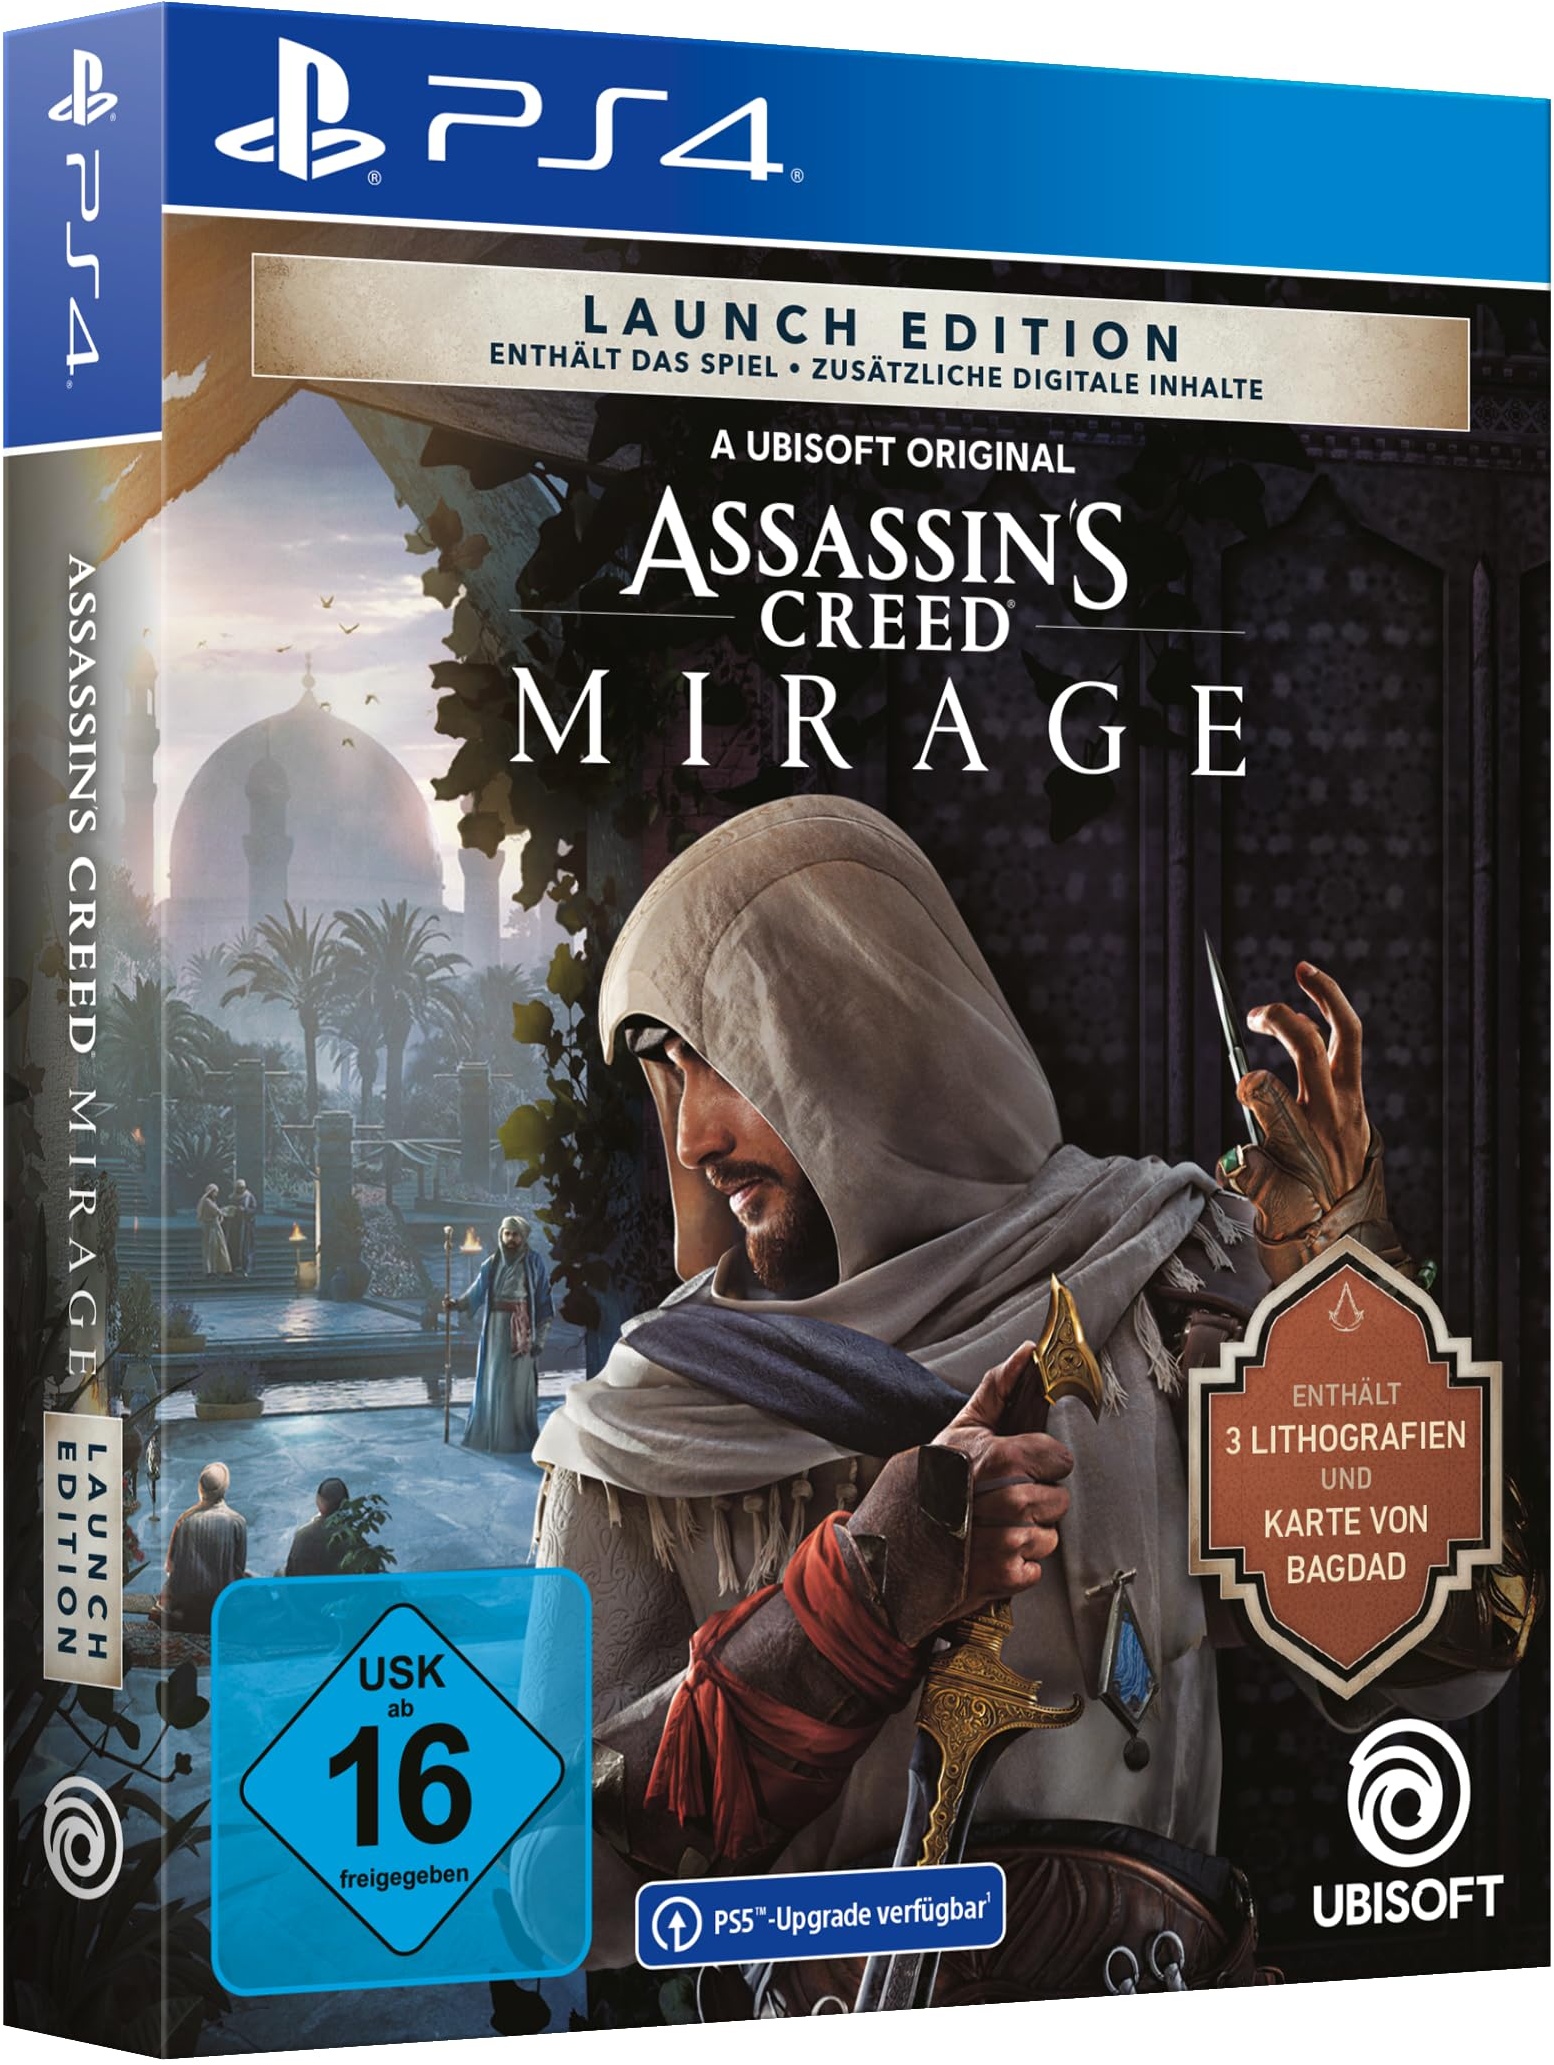 Assassin's Creed Mirage Launch Edition - [PlayStation 4] - Uncut